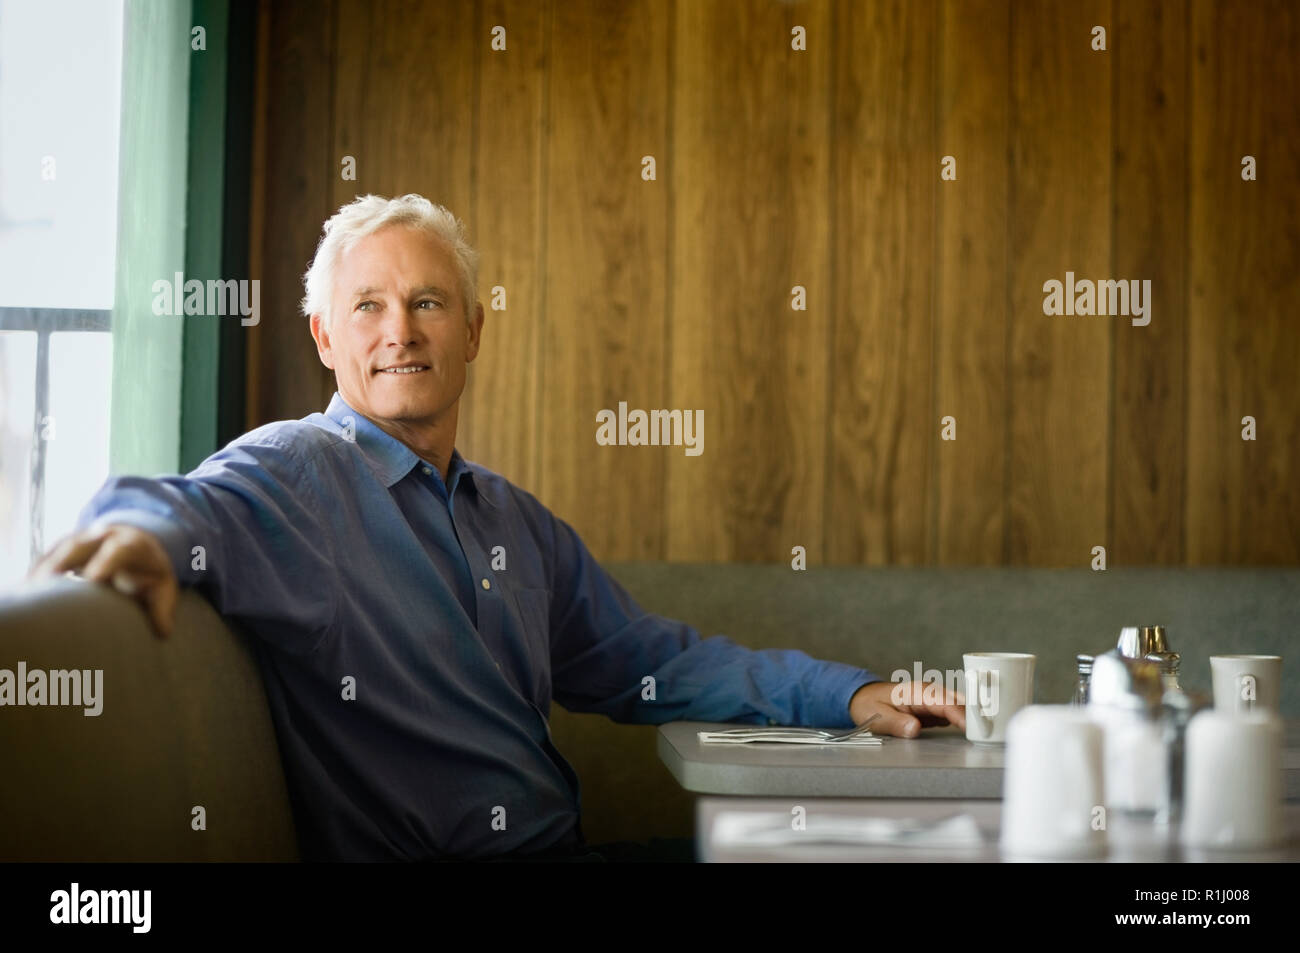 Mature man sitting in diner booth Stock Photo